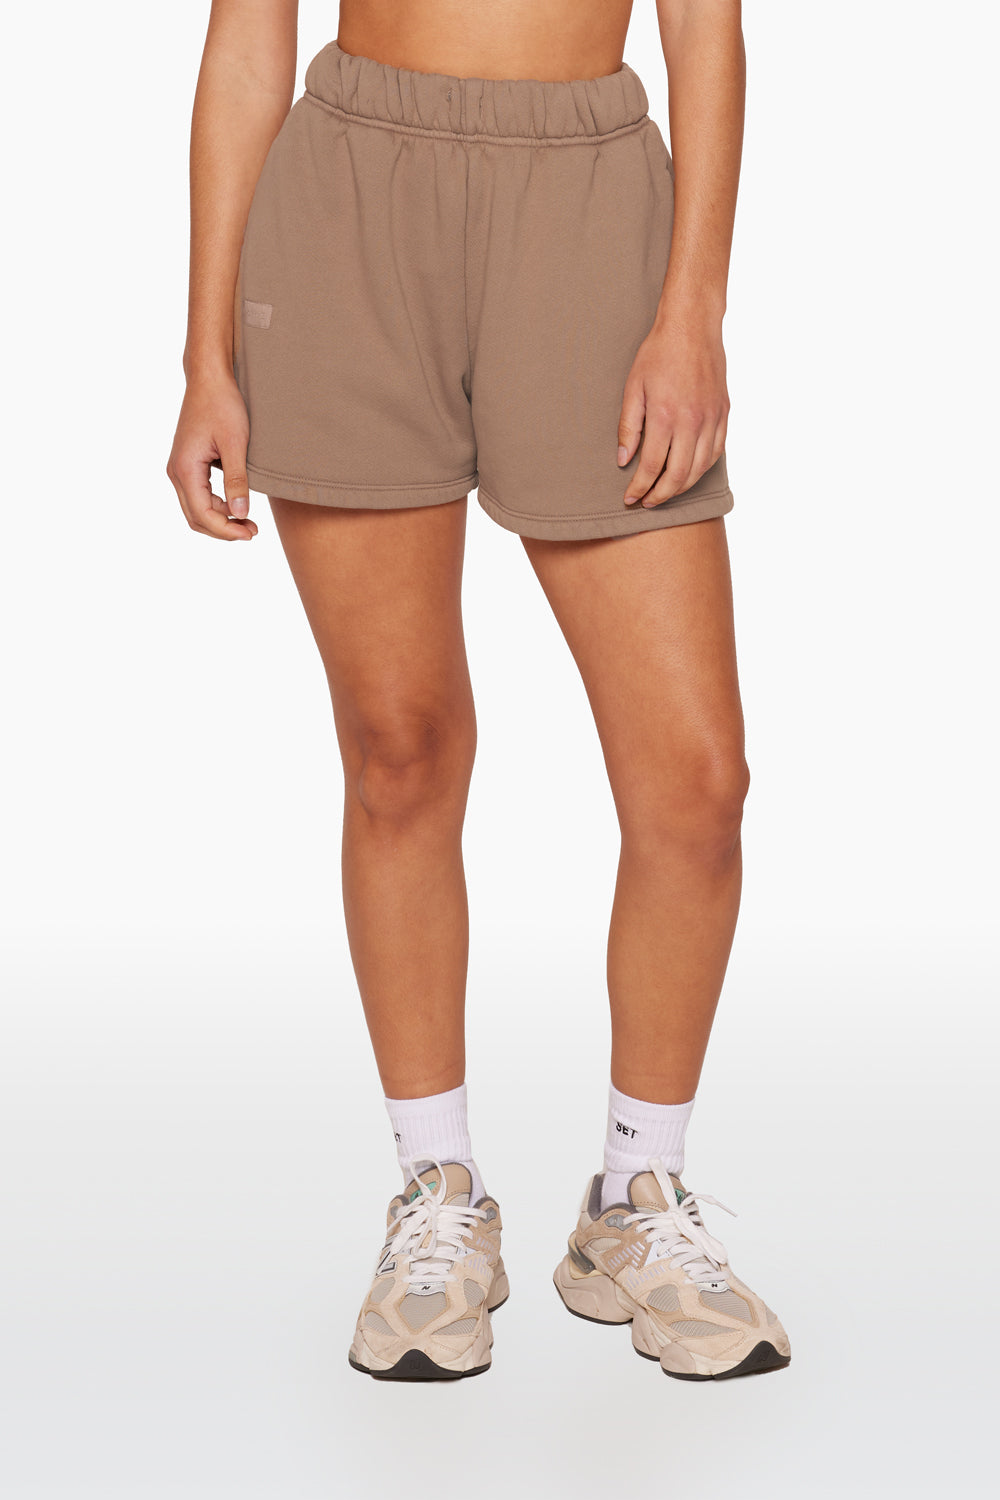 SWEAT SHORTS - DUGOUT Featured Image